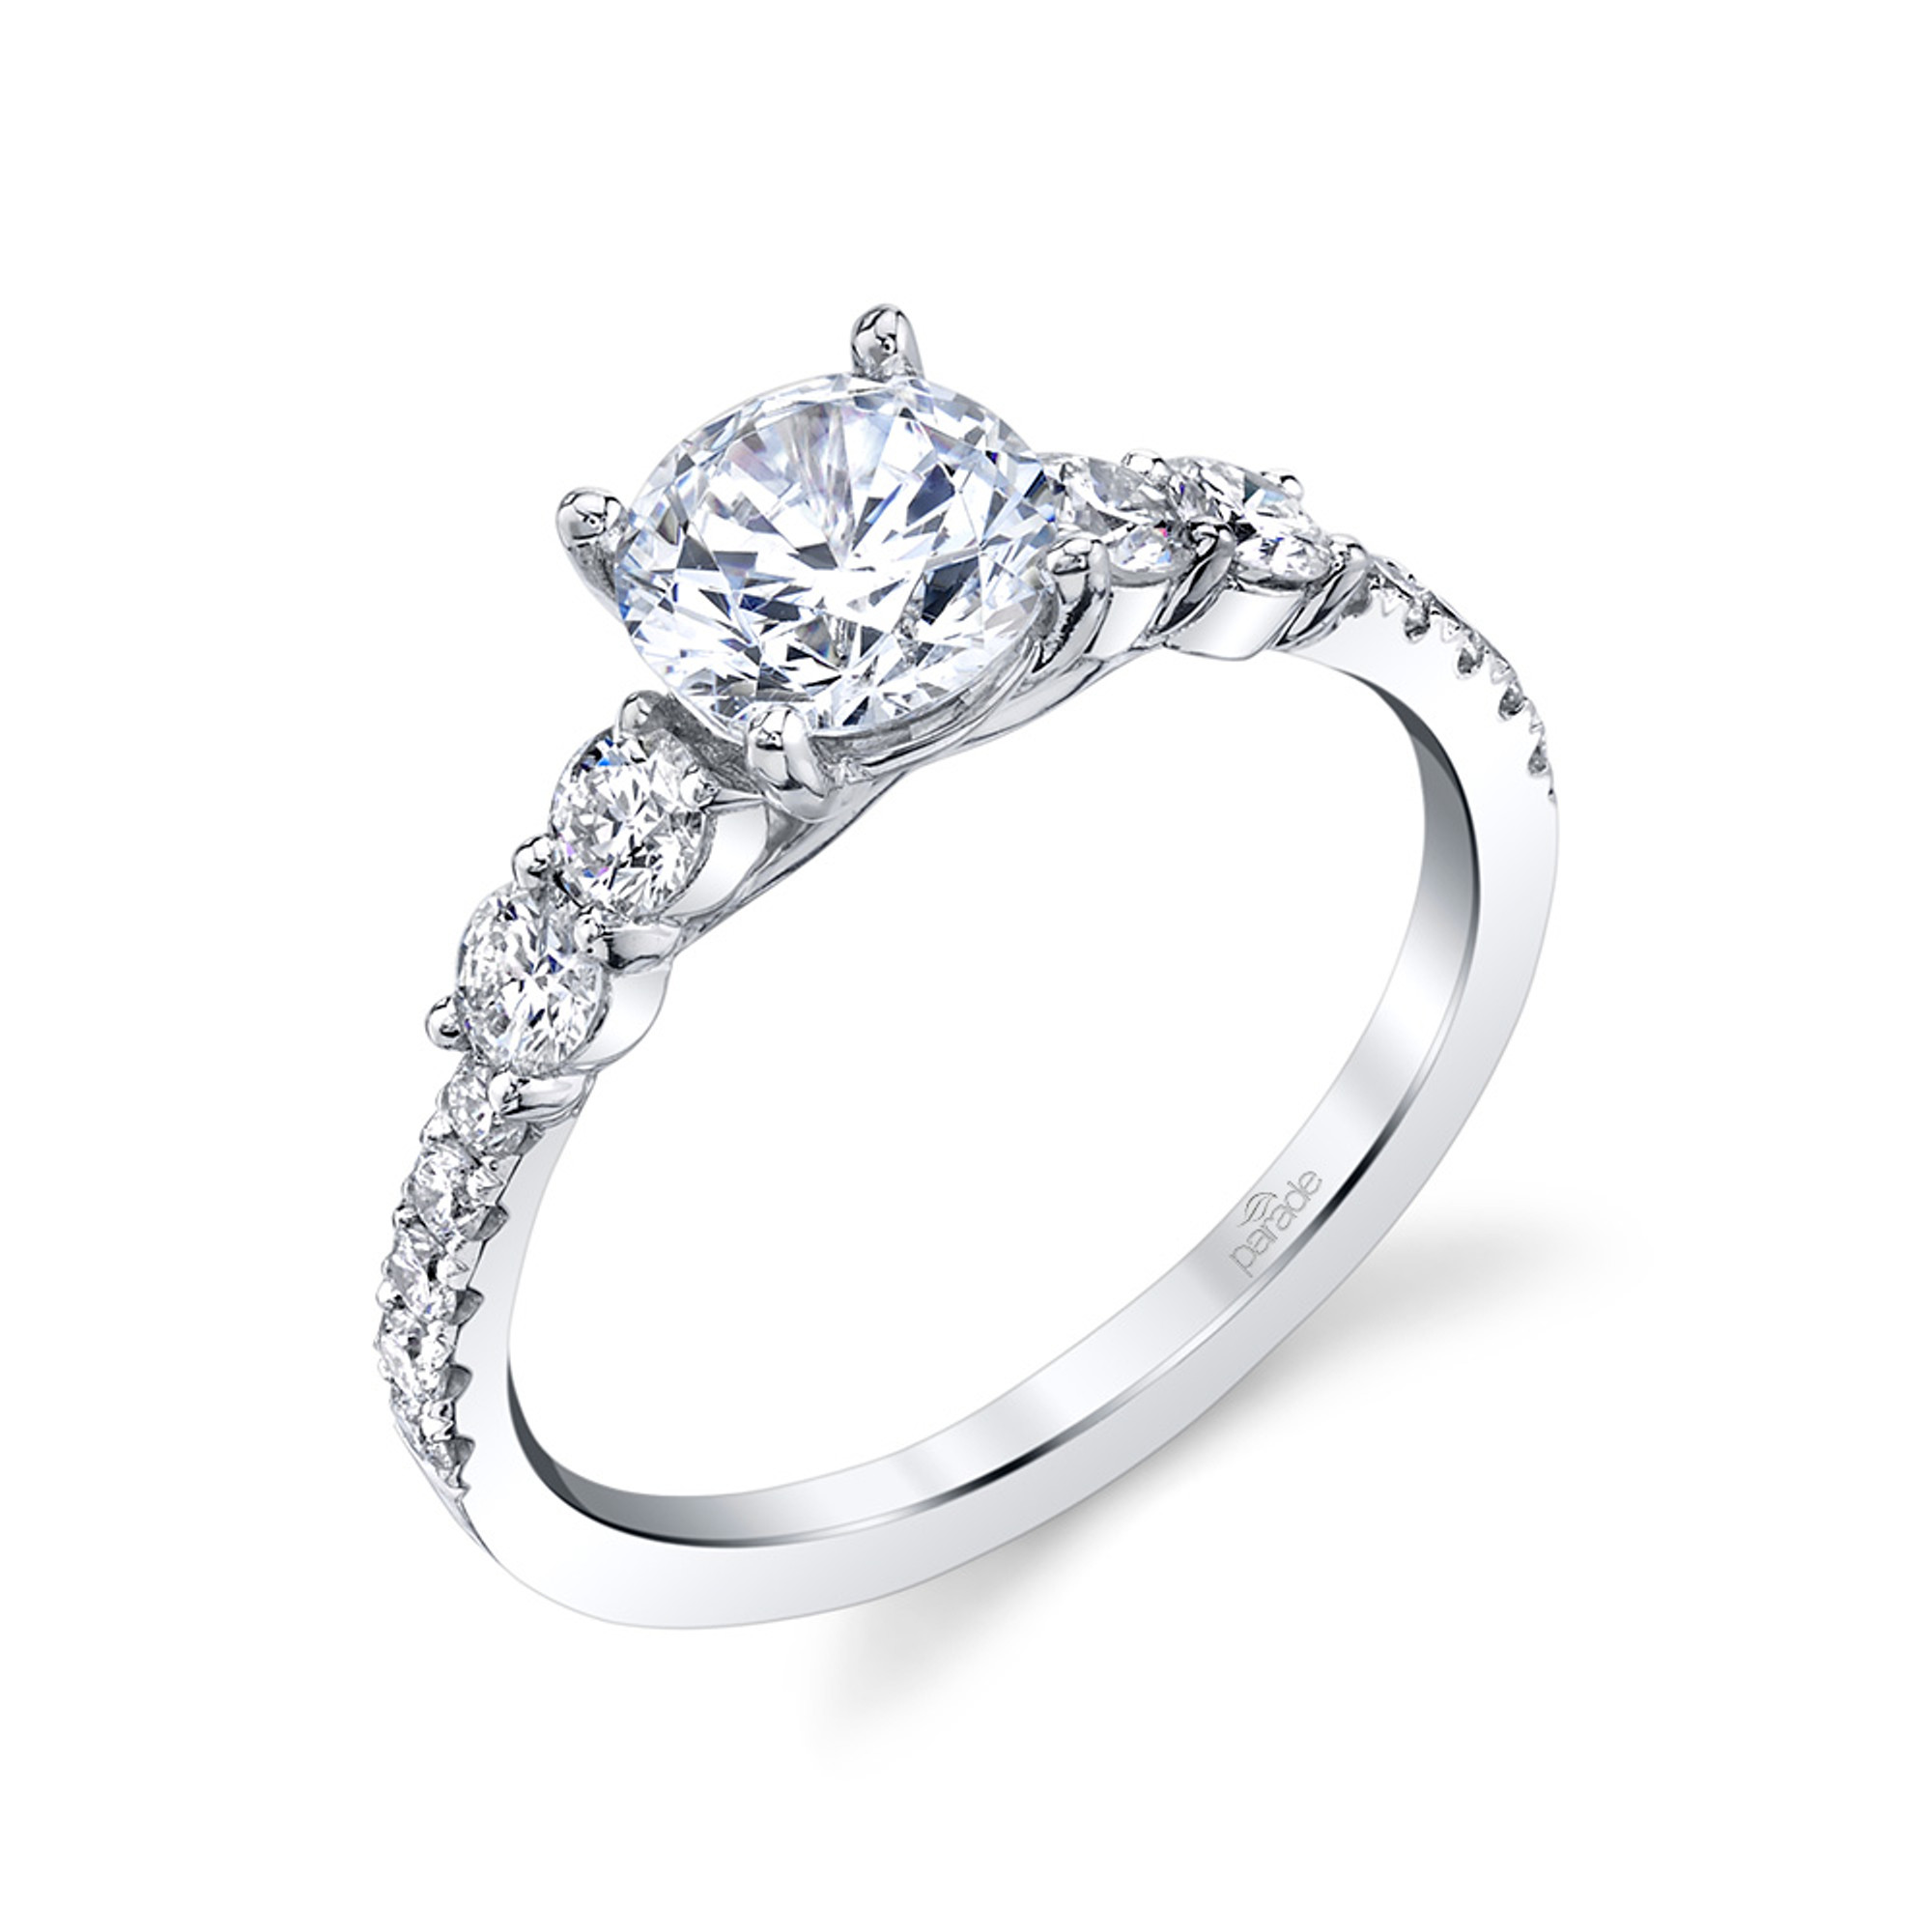 18kt White Gold and Diamond Engagement Ring by Parade